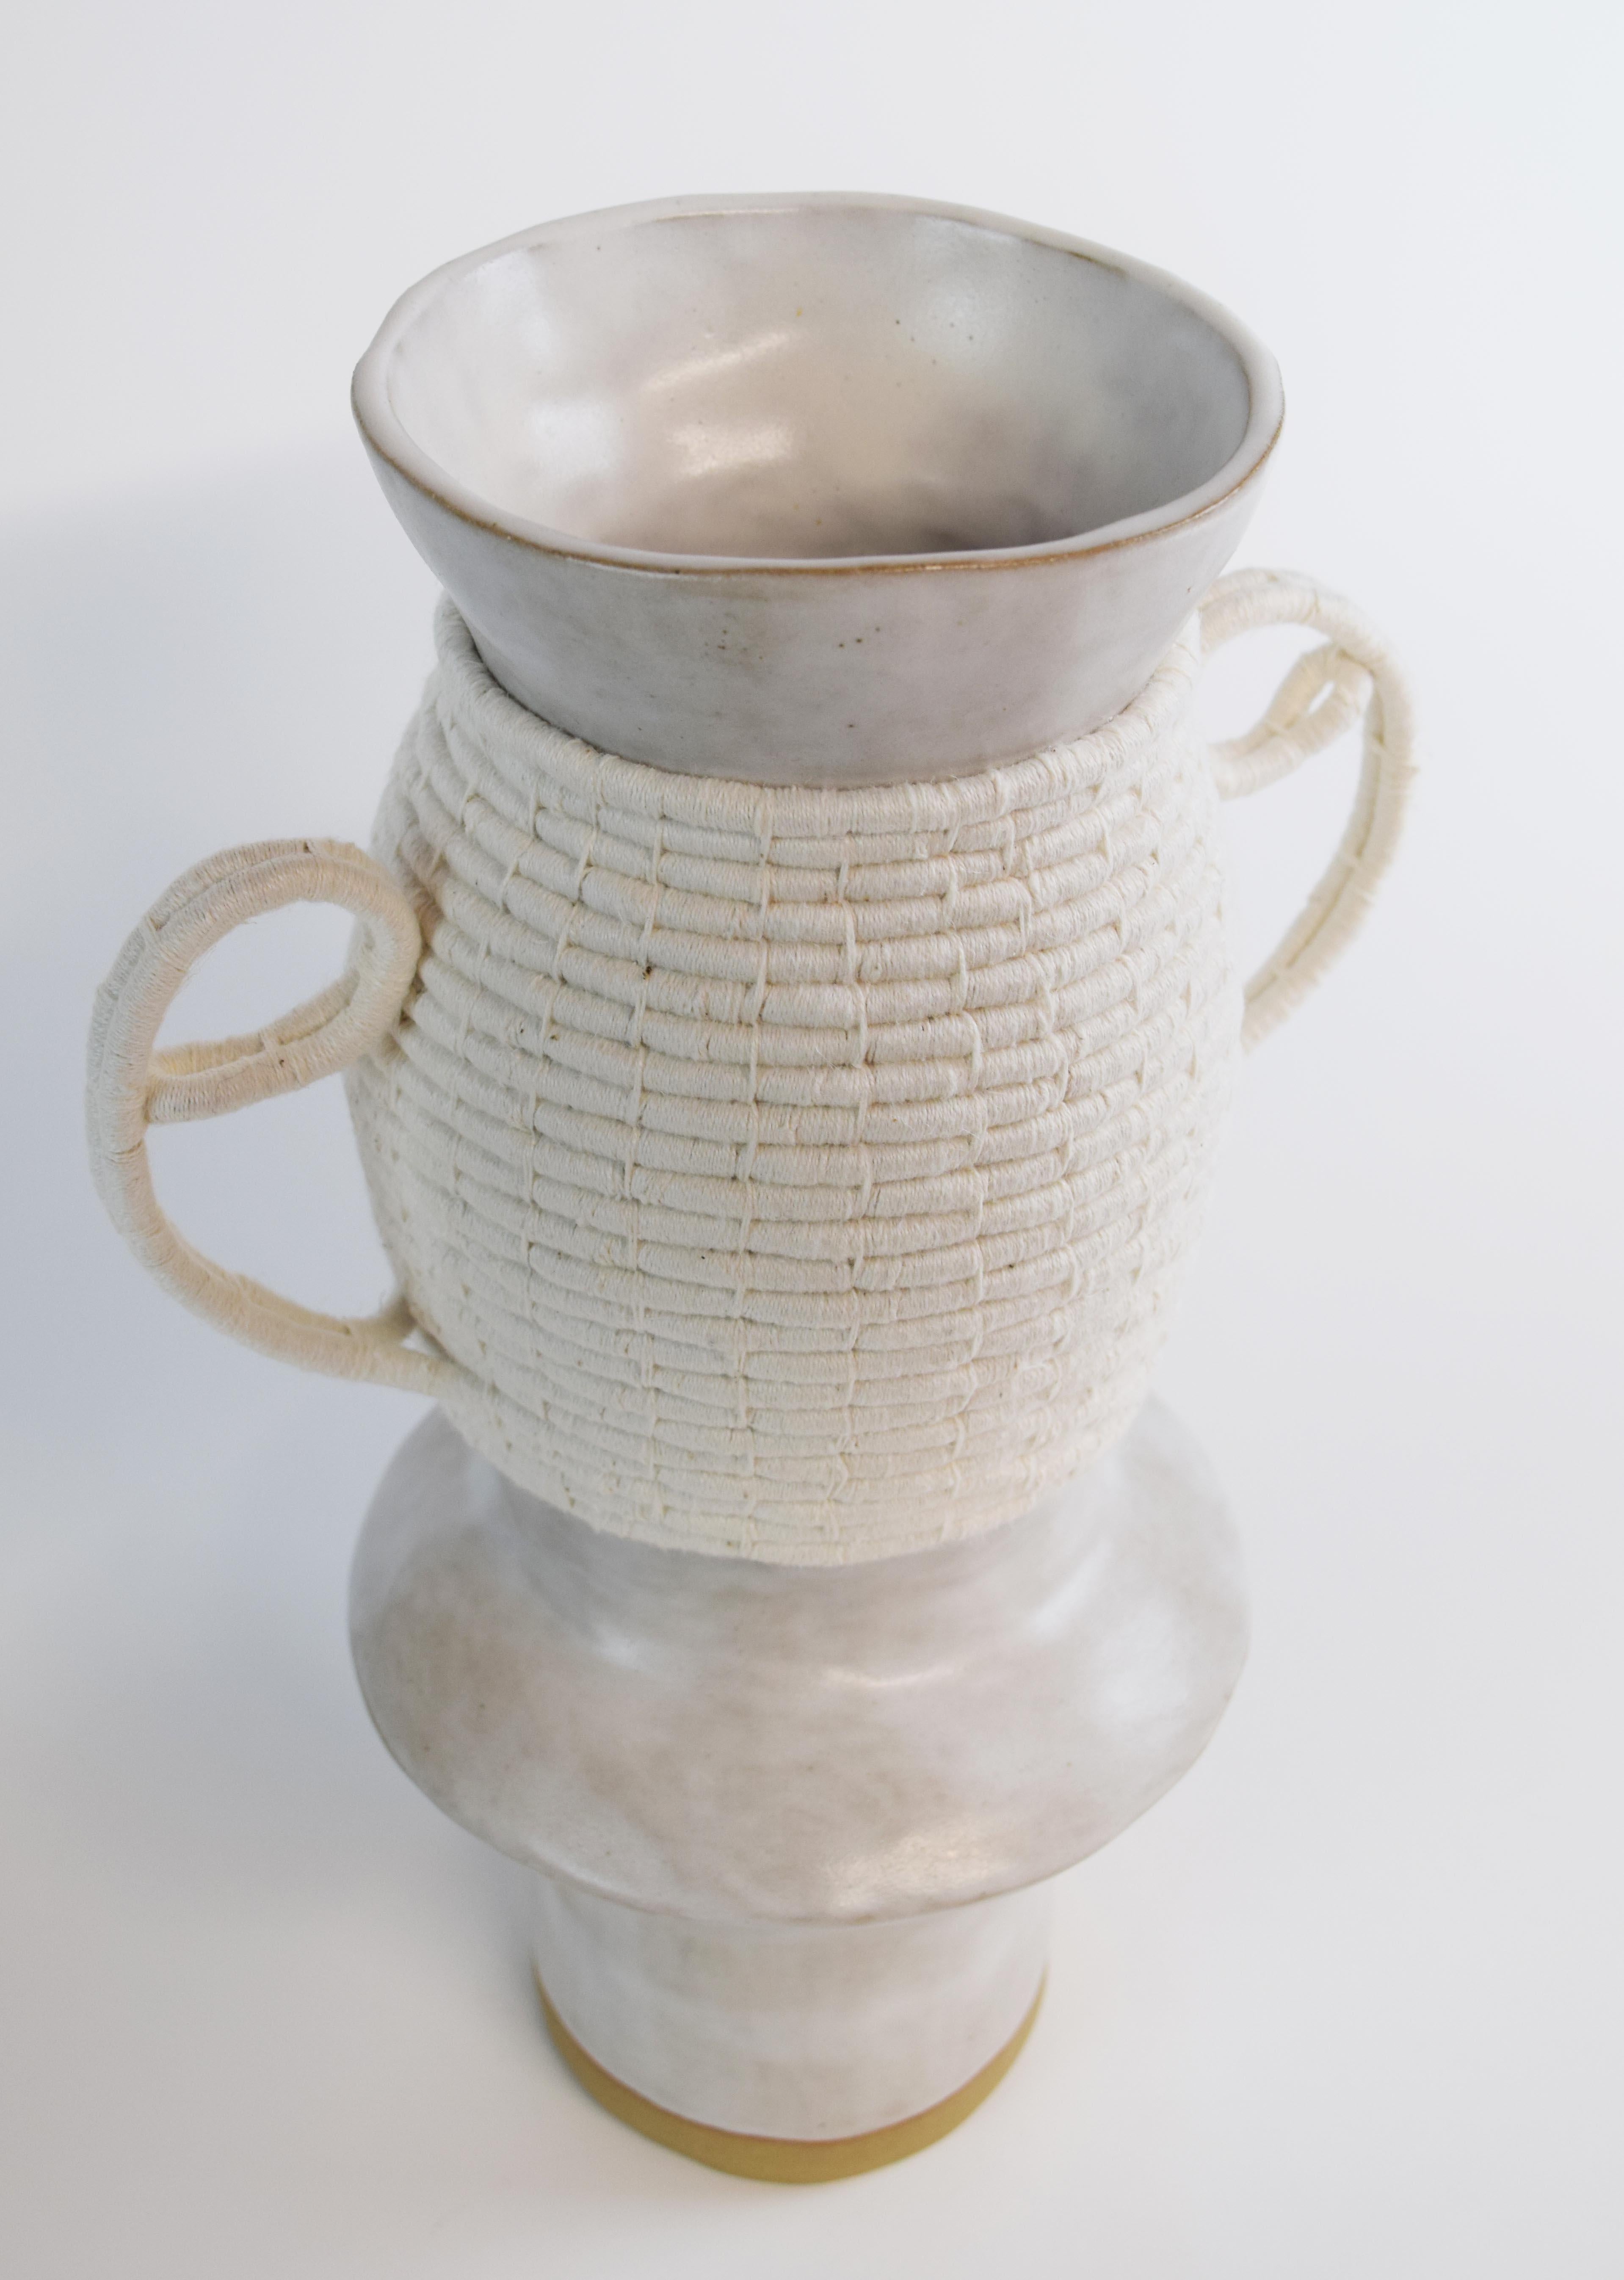 American One of a Kind Ceramic and Woven Cotton Vase #749 - White with White Weaving